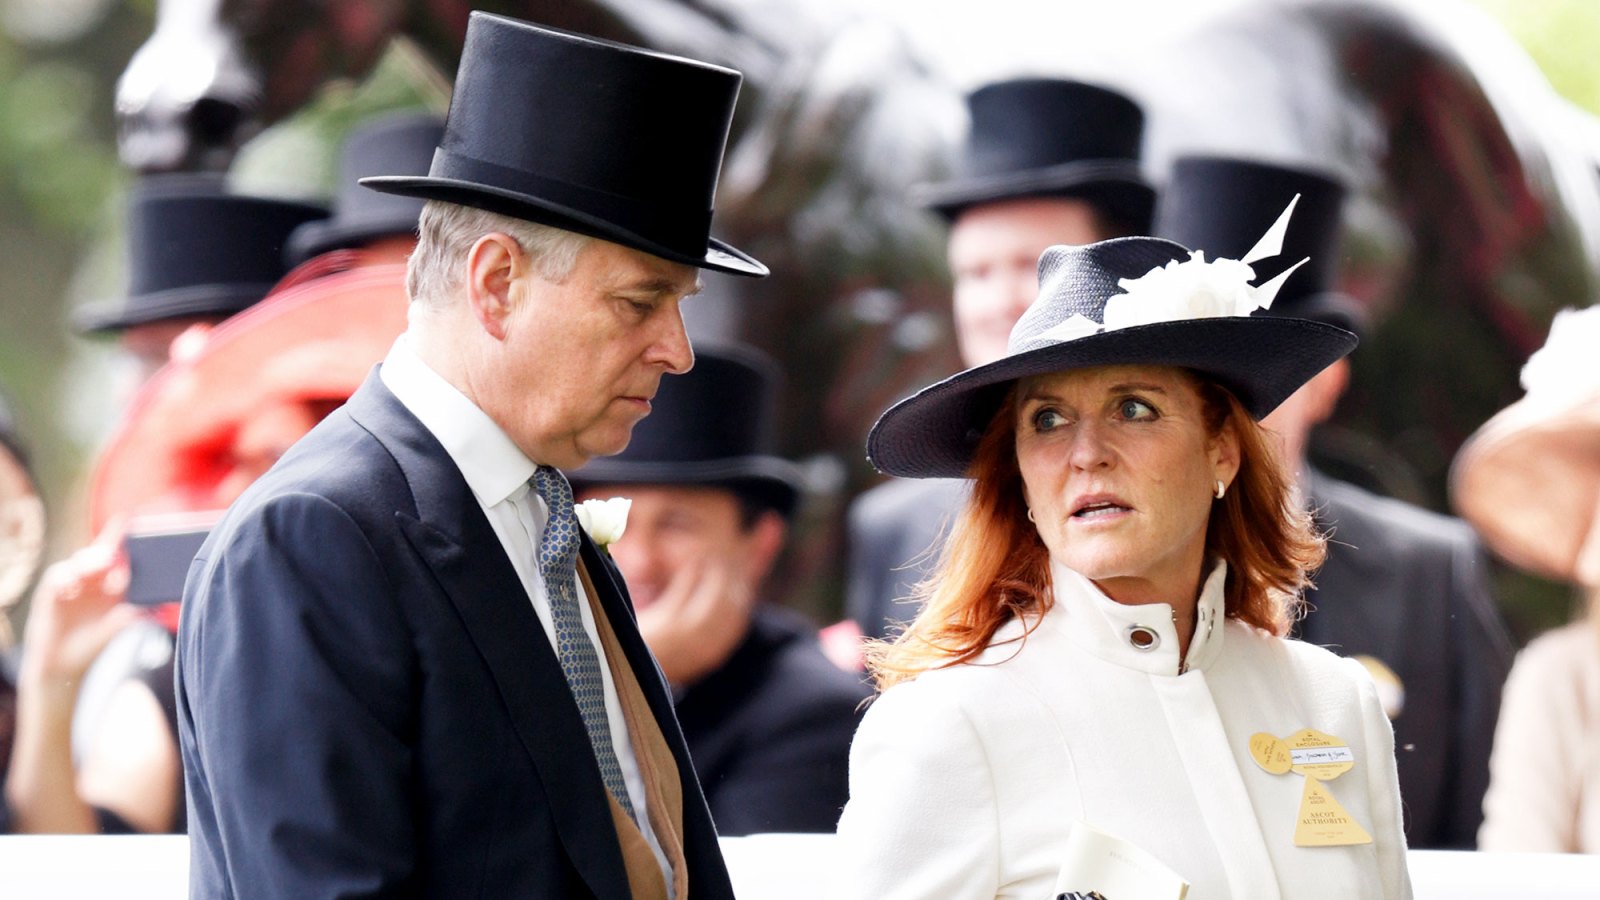 Prince Andrew, Duke of York and Sarah Ferguson, Duchess of York Prince Andrew and Sarah Ferguson Are Not Back Together But Remain ‘Good Friends’